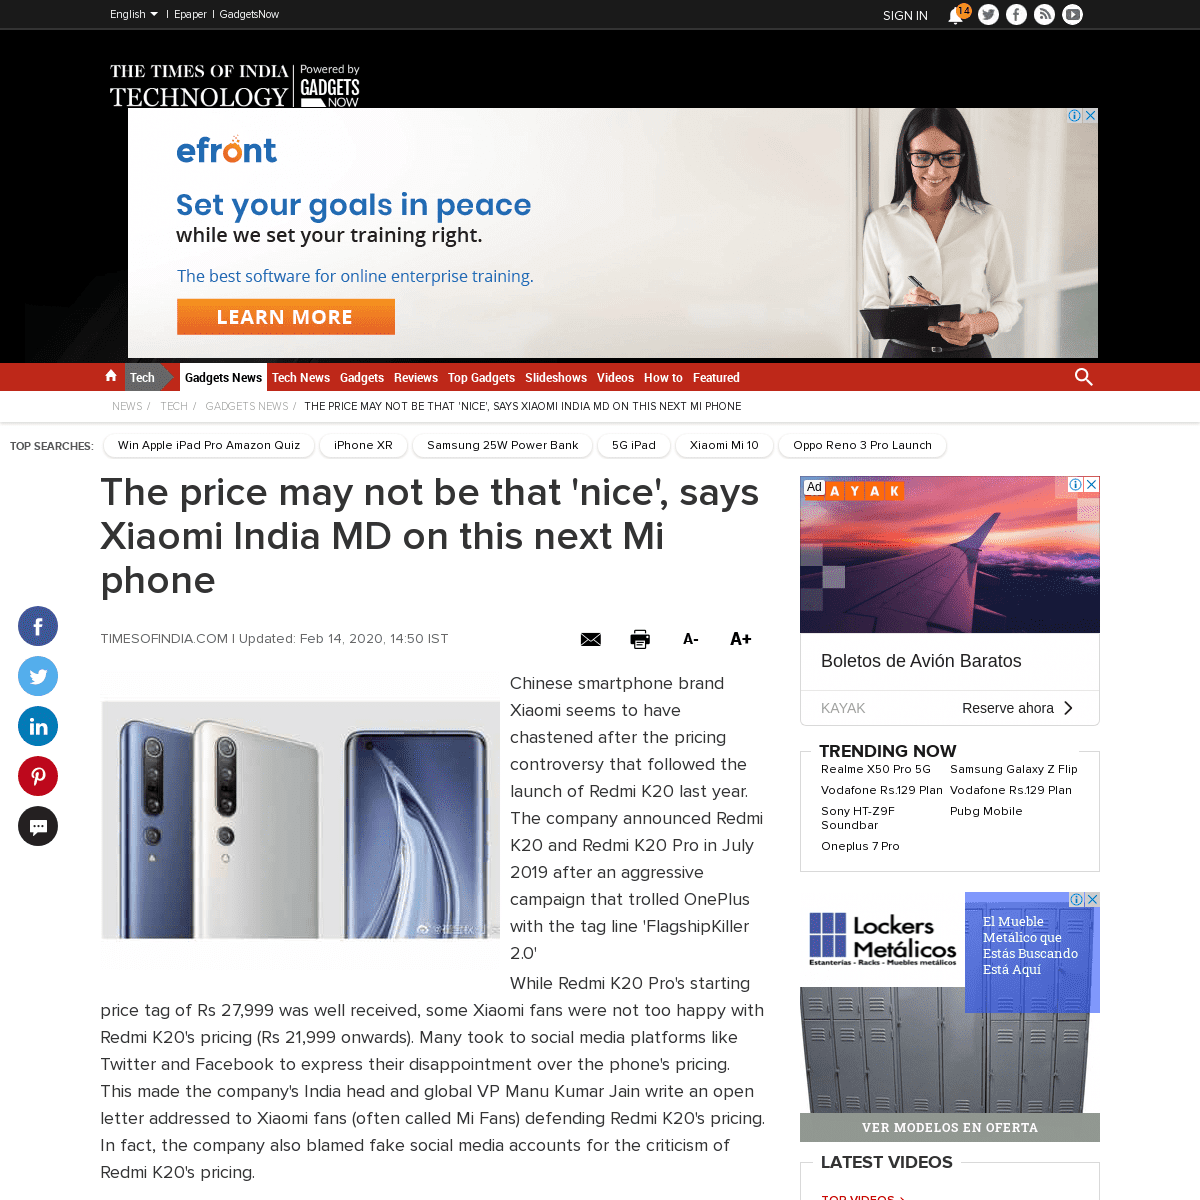 A complete backup of timesofindia.indiatimes.com/gadgets-news/the-price-may-not-be-that-nice-says-xiaomi-india-md-on-this-next-m